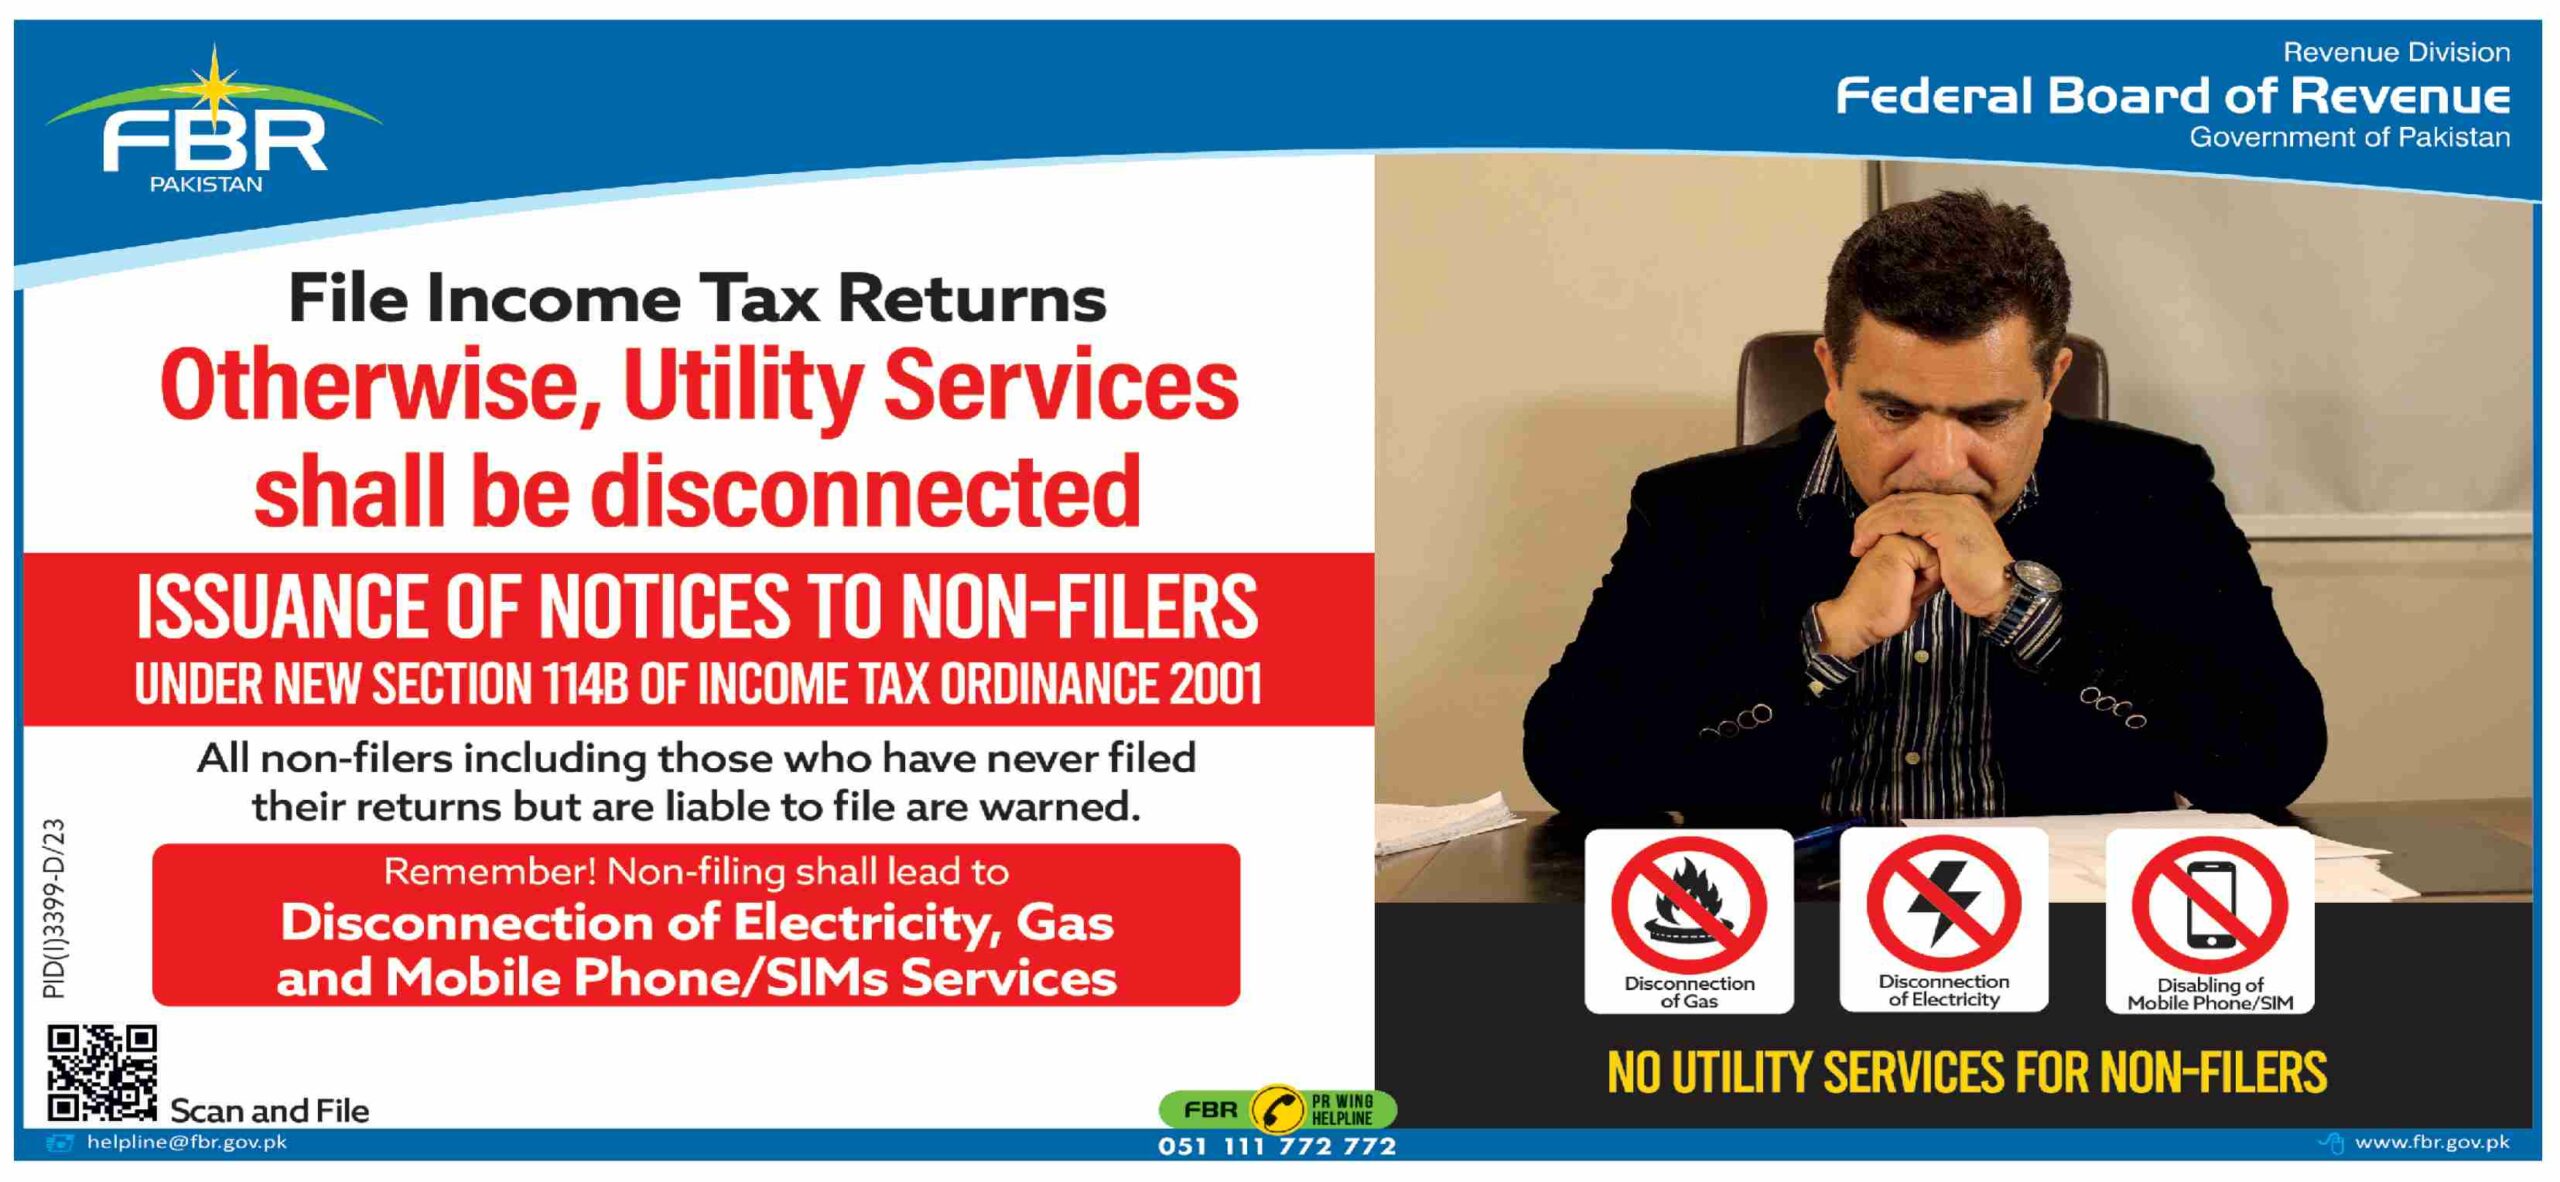 FBR No Utility Services Electricity, Gas & Mobile Phone SIMs Services For Non-Filers Detail